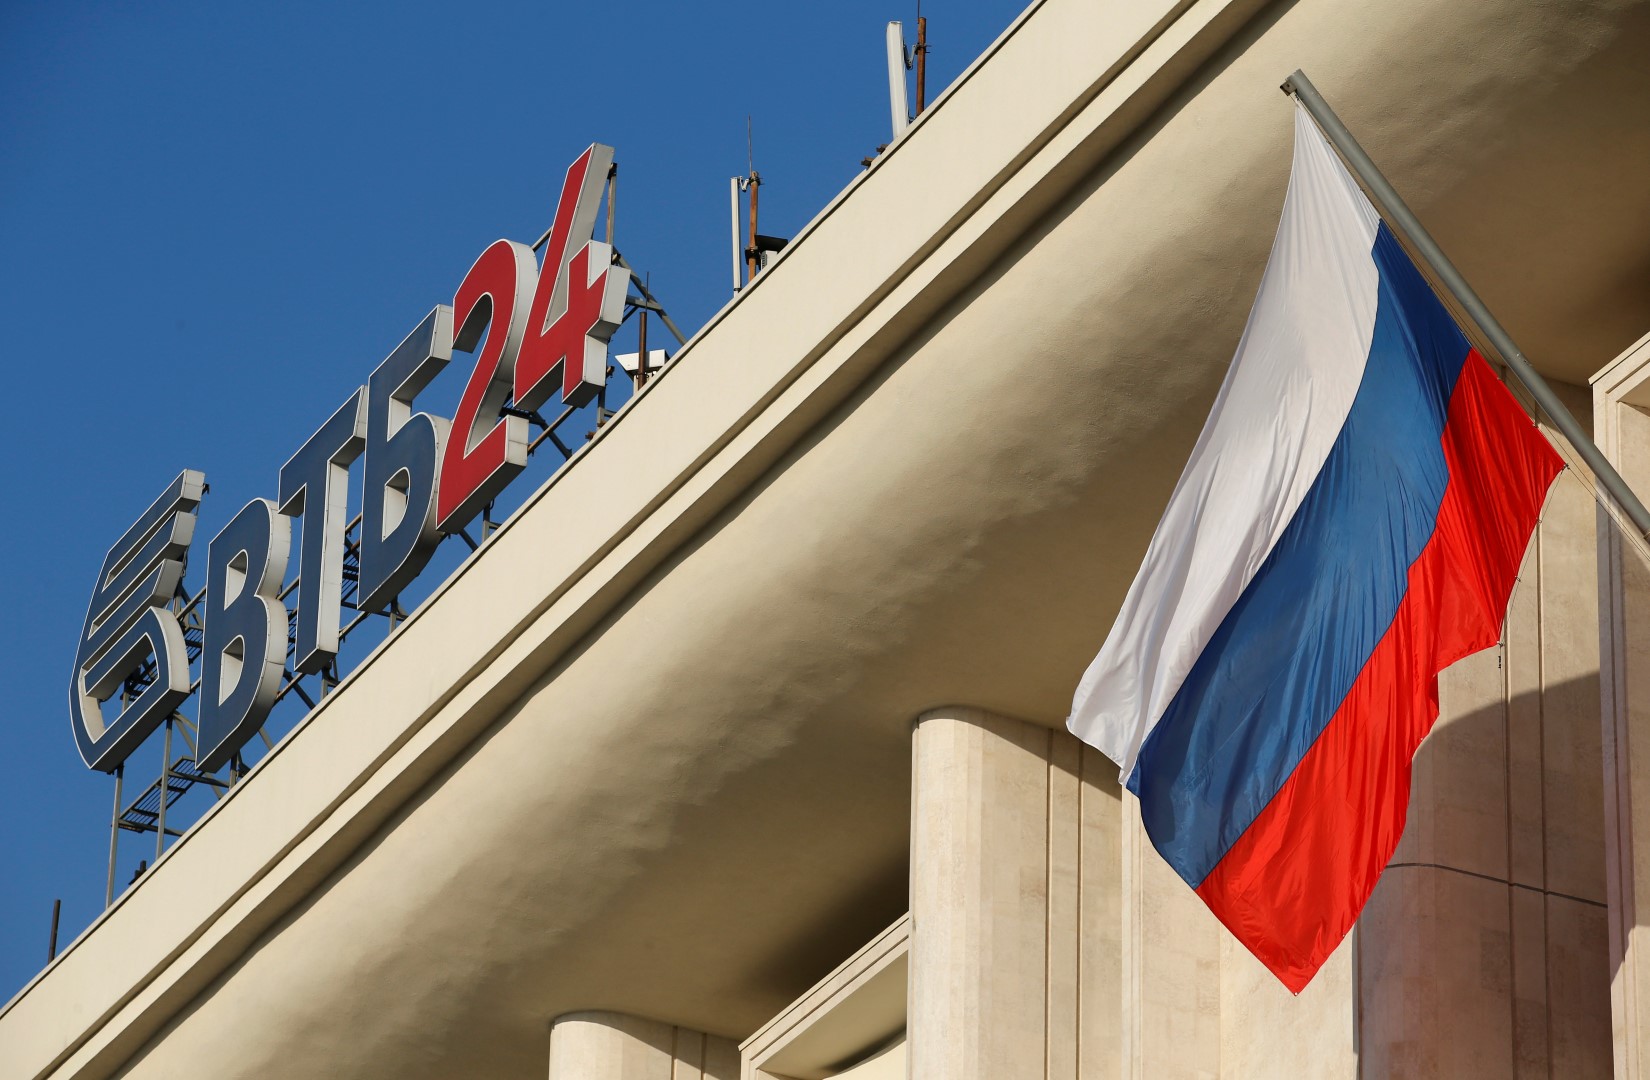 The logo of VTB Bank is displayed on the roof of a building, with a Russian national flag seen nearby, in Moscow, November 20, 2014. Russia's second-largest bank VTB said on Thursday its third-quarter net profit fell 98 percent year-on-year, dragged lower by higher provisions for bad loans and an economic slowdown. REUTERS/Maxim Zmeyev (RUSSIA - Tags: BUSINESS LOGO) - RTR4EUSH